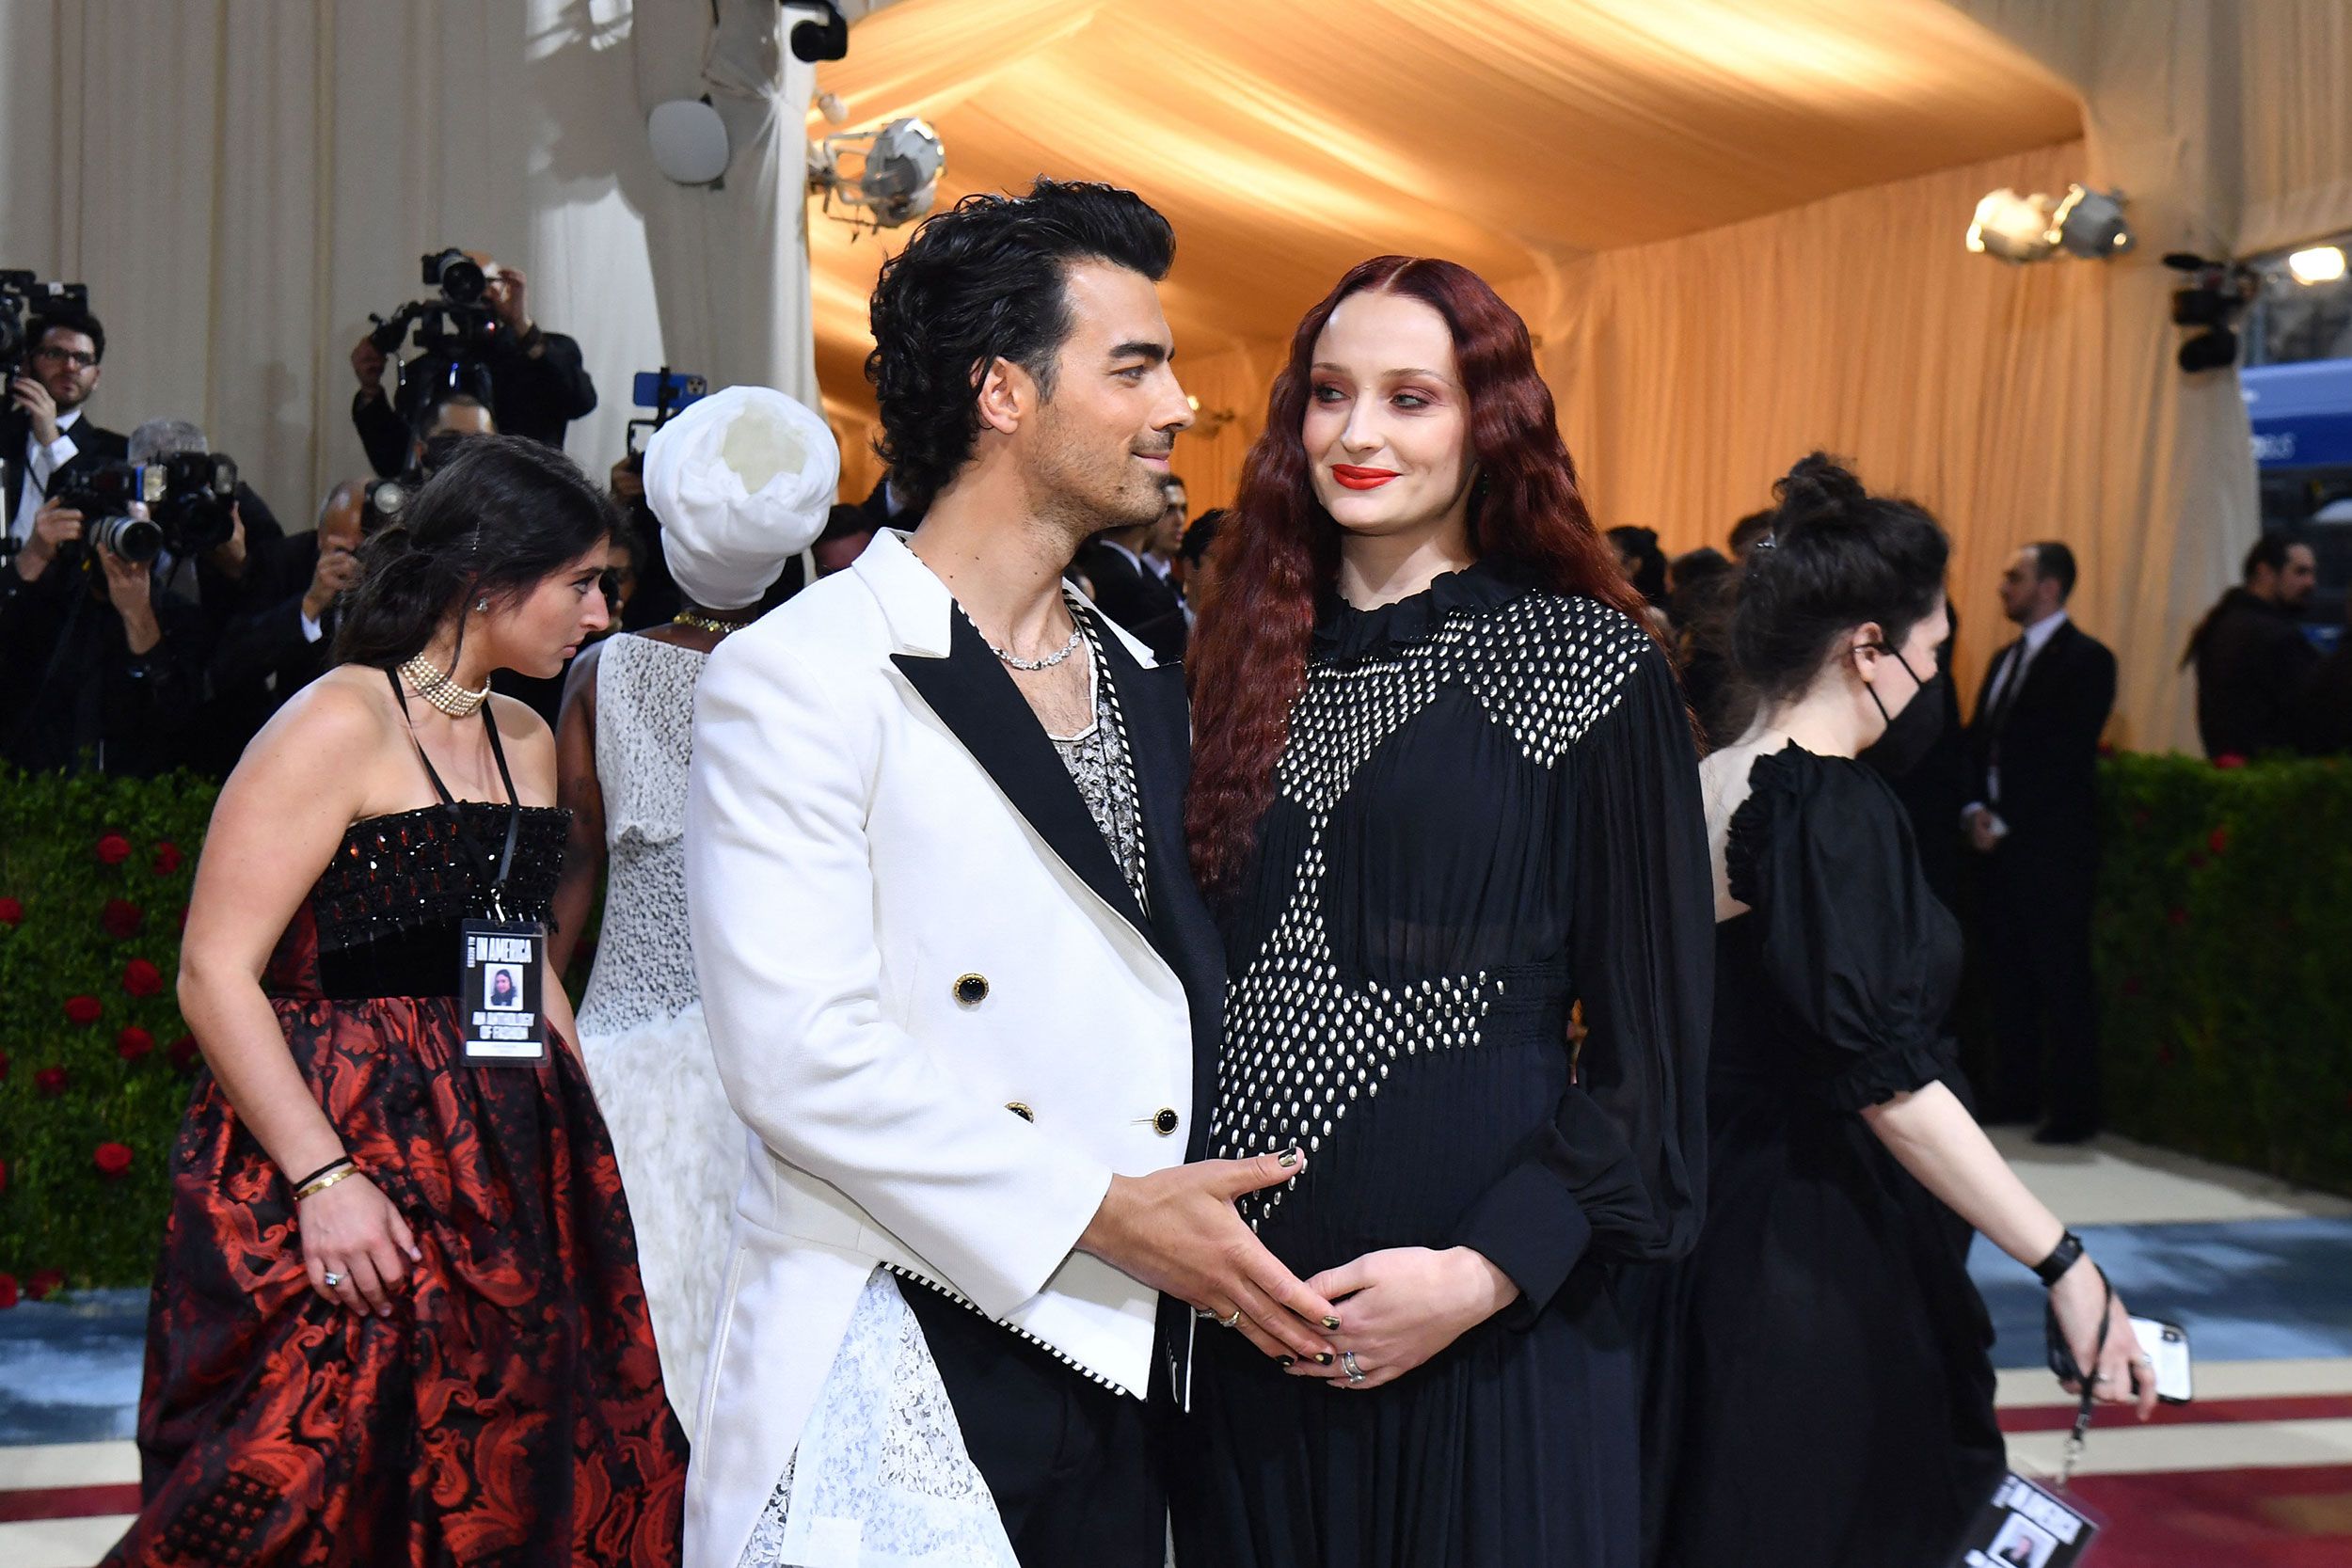 Joe Jonas and Sophie Turner welcome their first baby